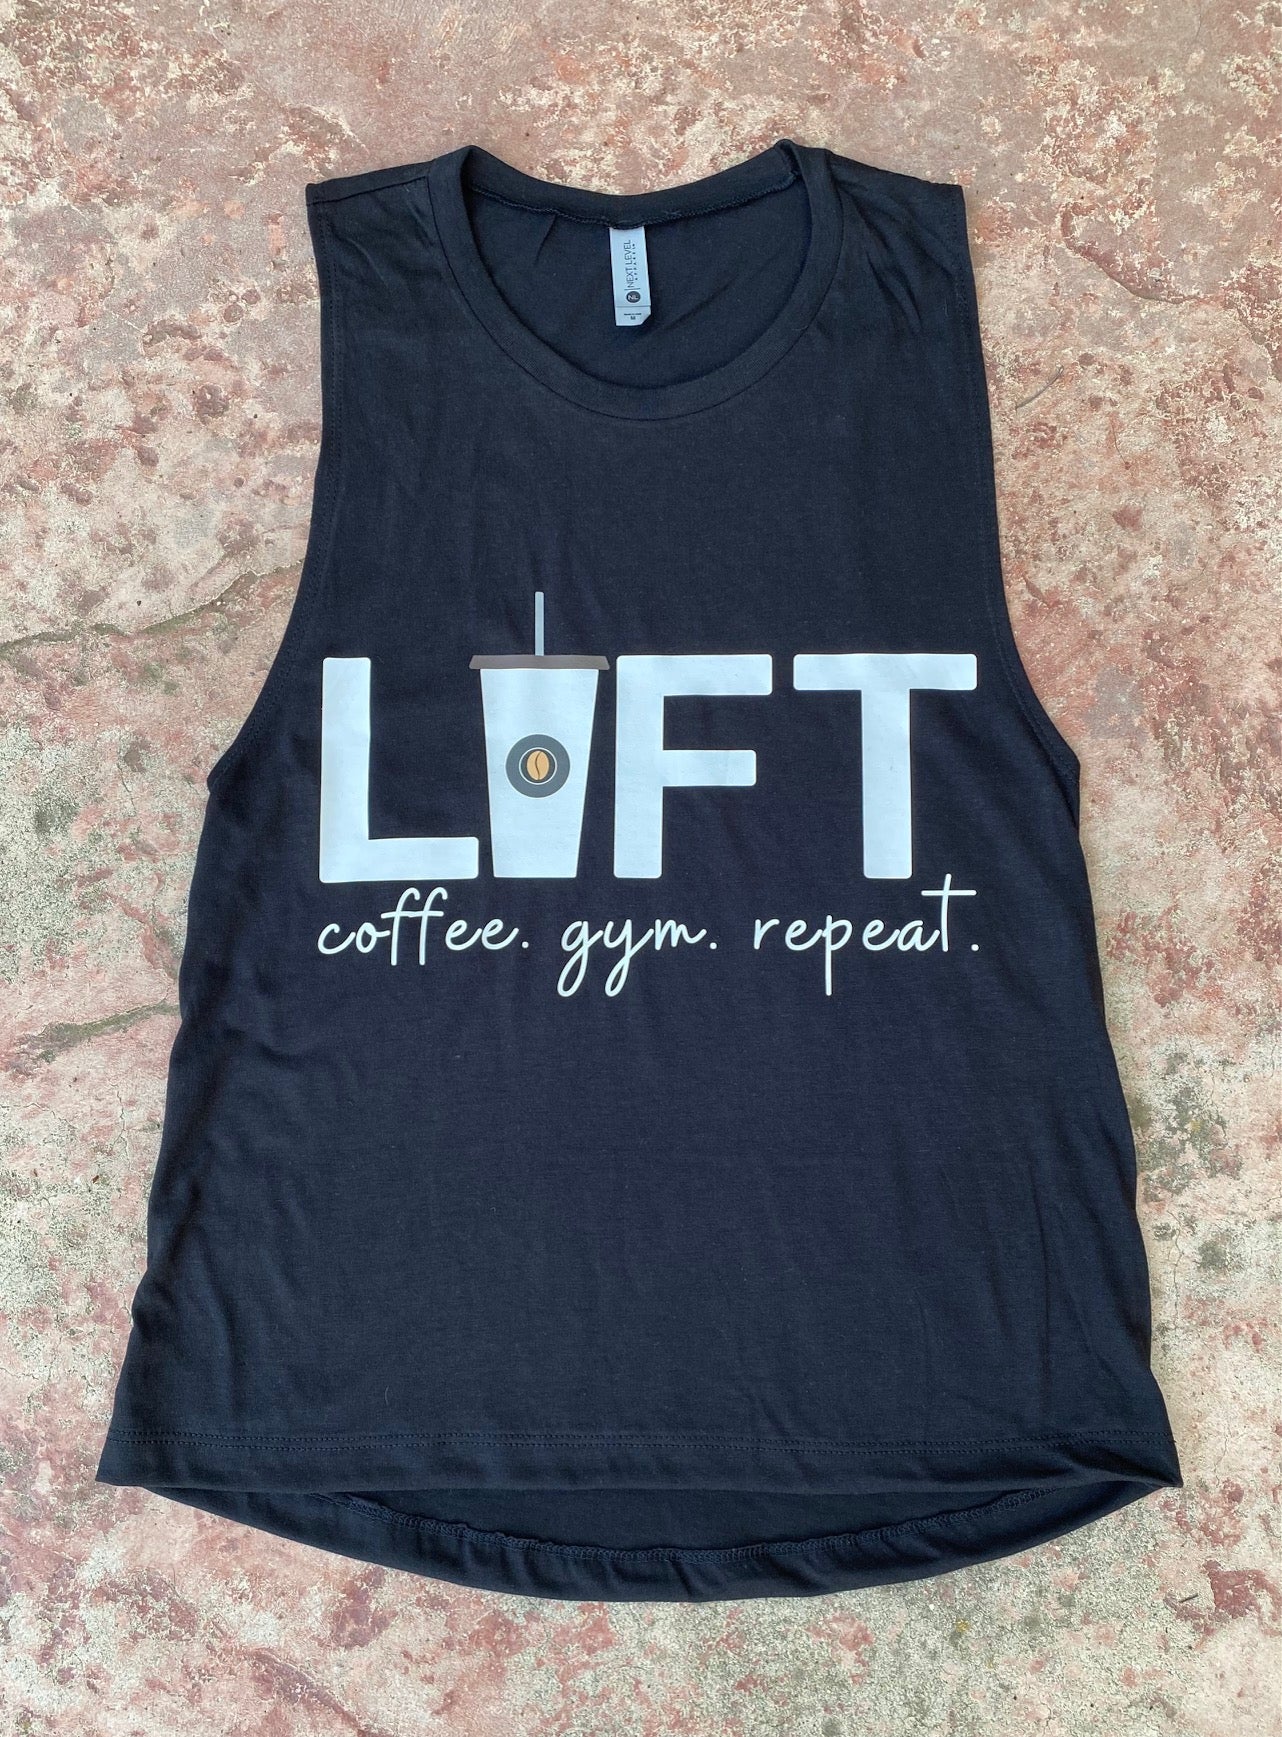 LIFT Coffee. Gym. Repeat. Black Muscle Tank Top